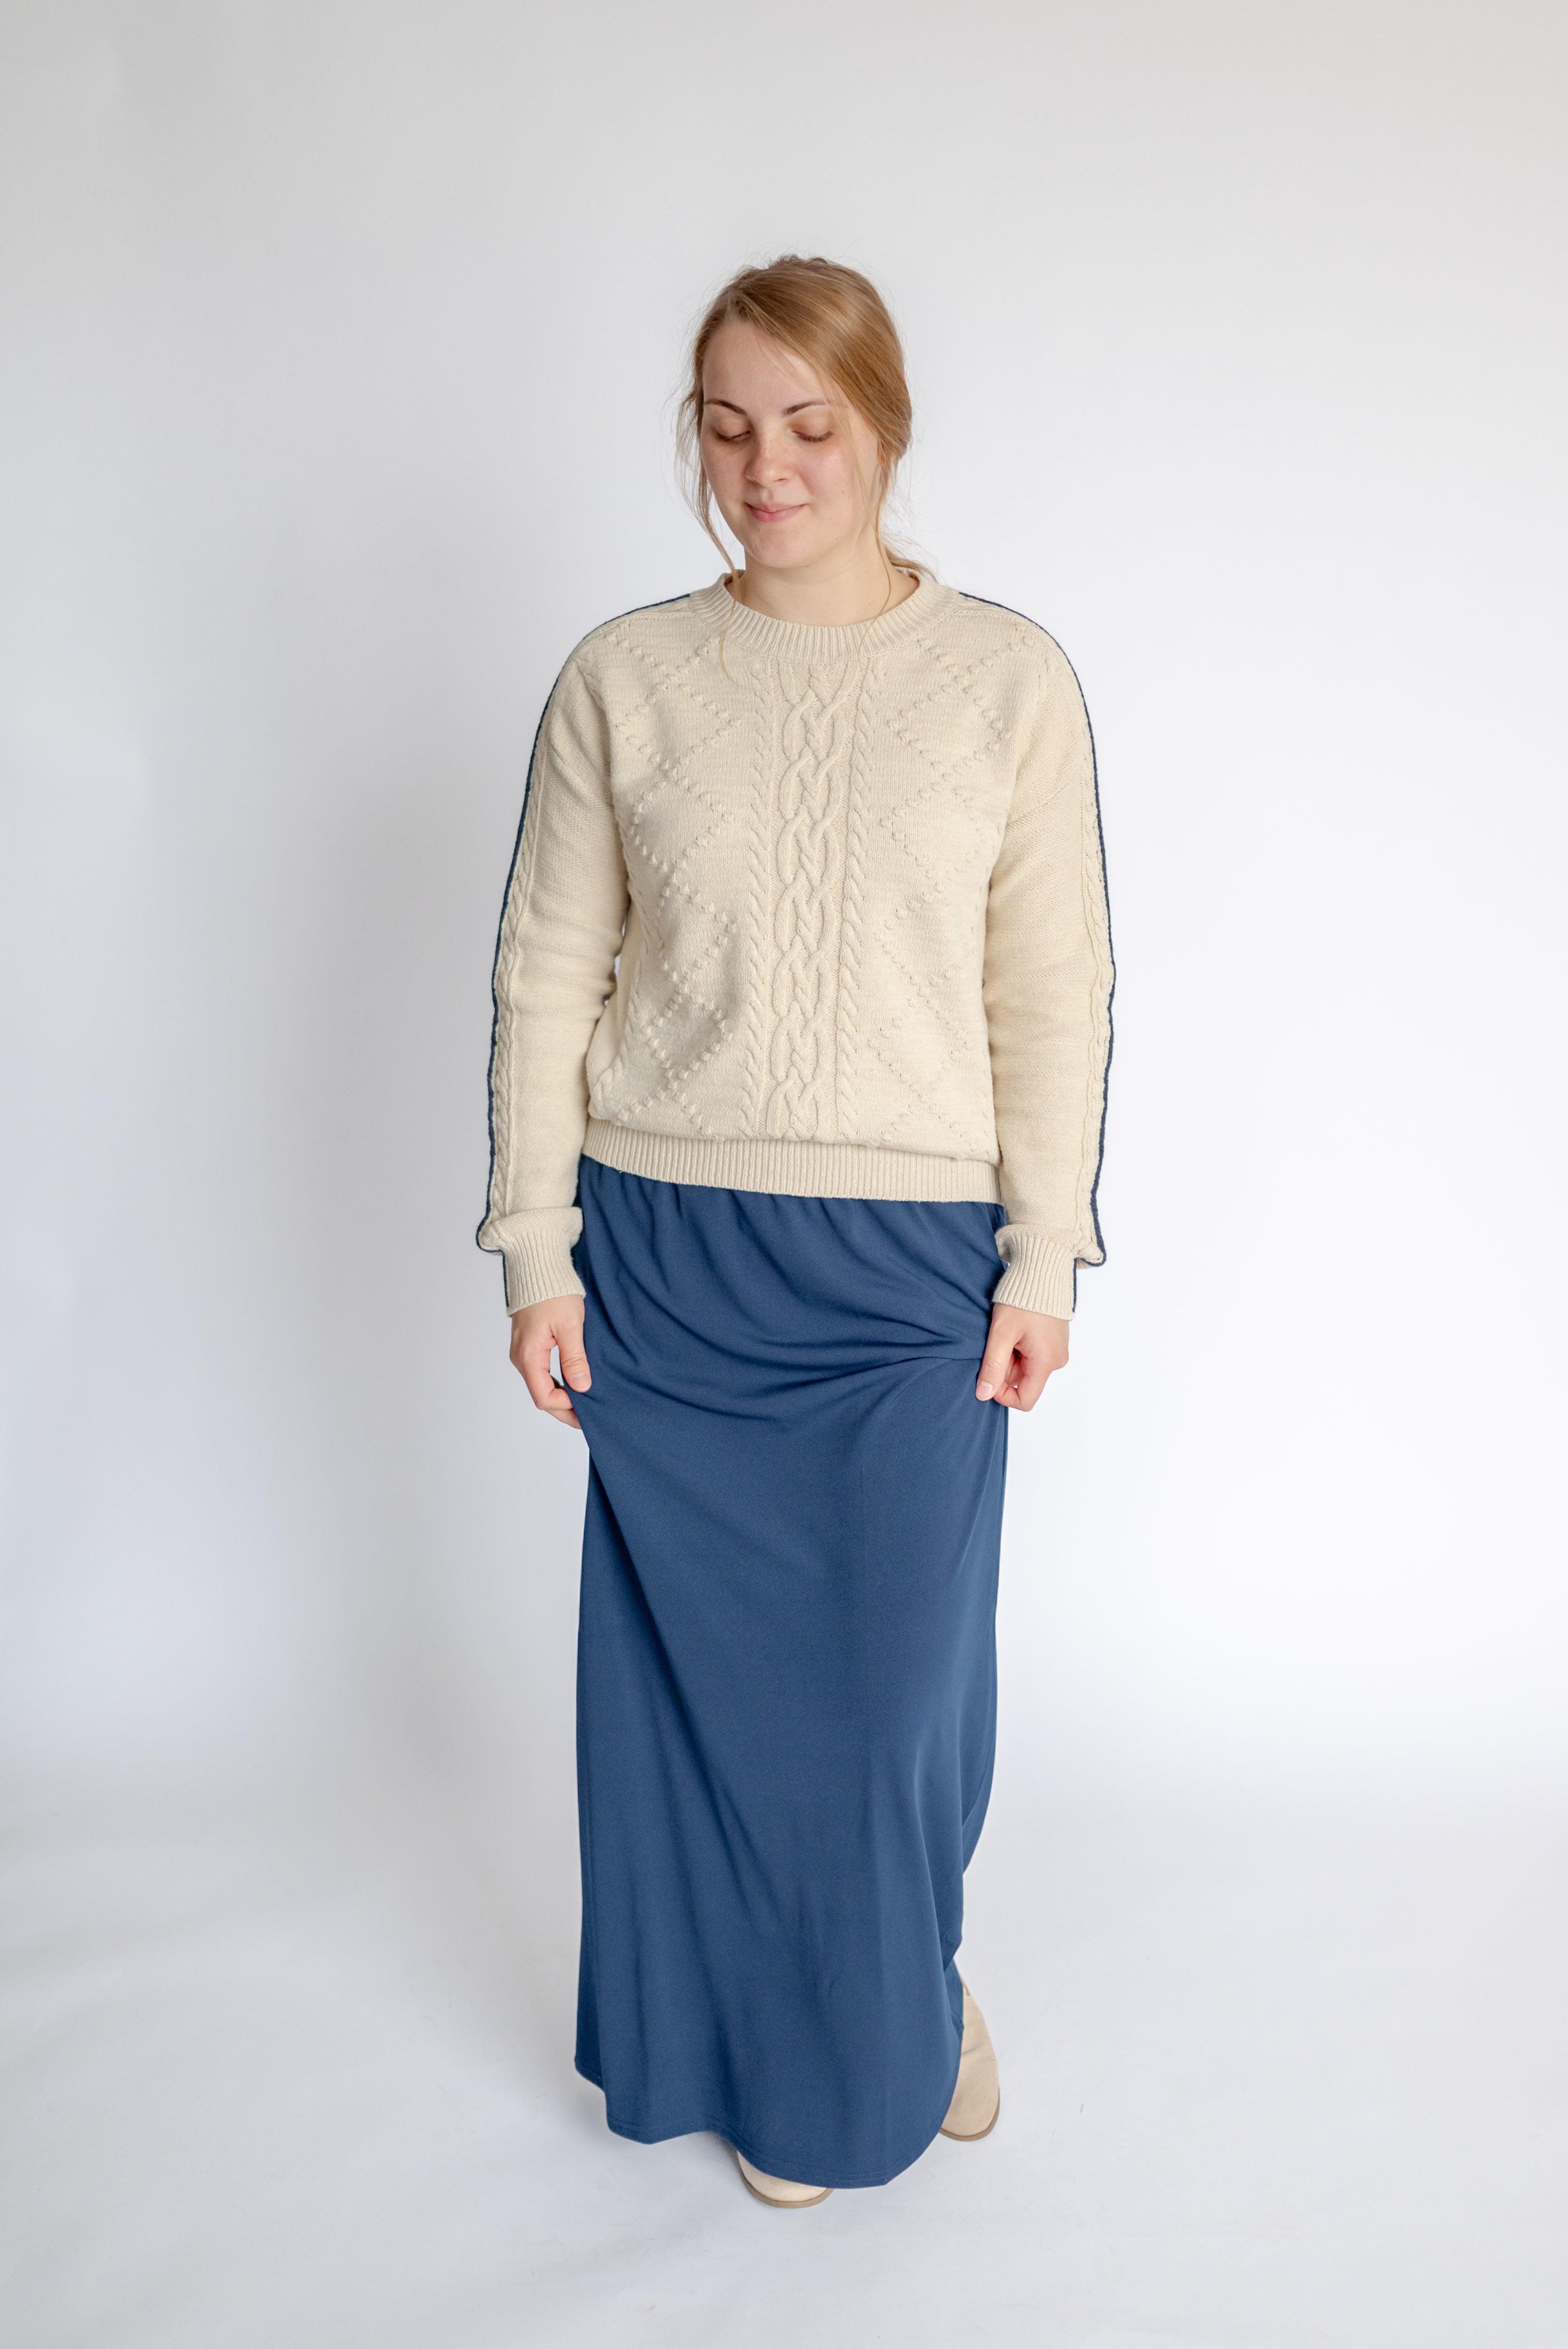 Carly Cable Knit Sweater in Almond - Carly Cable Knit Sweater in Almond - undefined - Salt and Honey